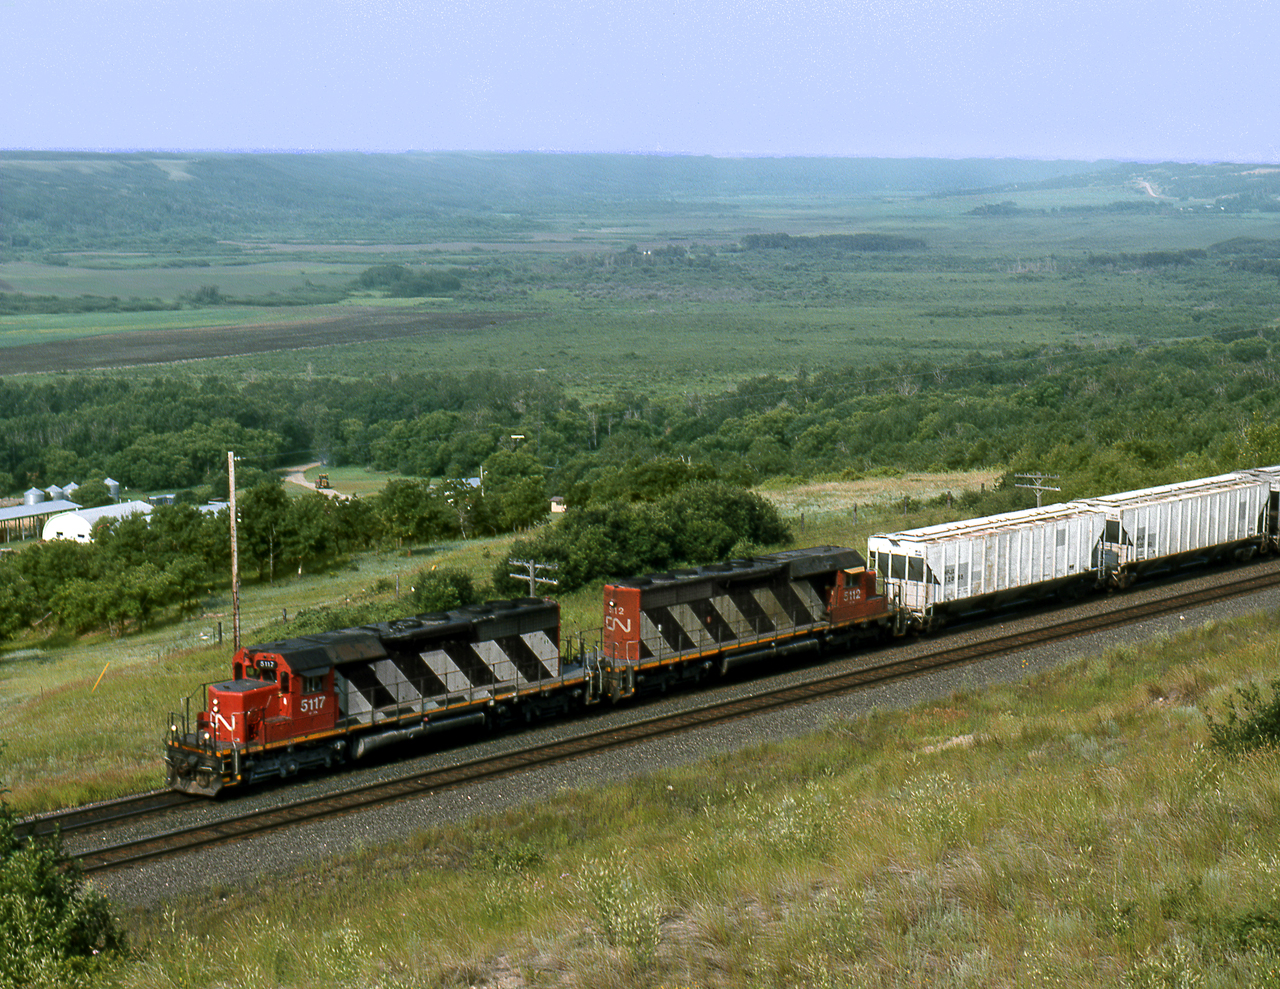 CN potash switcher out of Melville crosses the Saskatchewan/Manitoba border as it drops into the Qu'appelle valley. The train will switch the Rocanville potash mine located on a spur on the other side of the valley